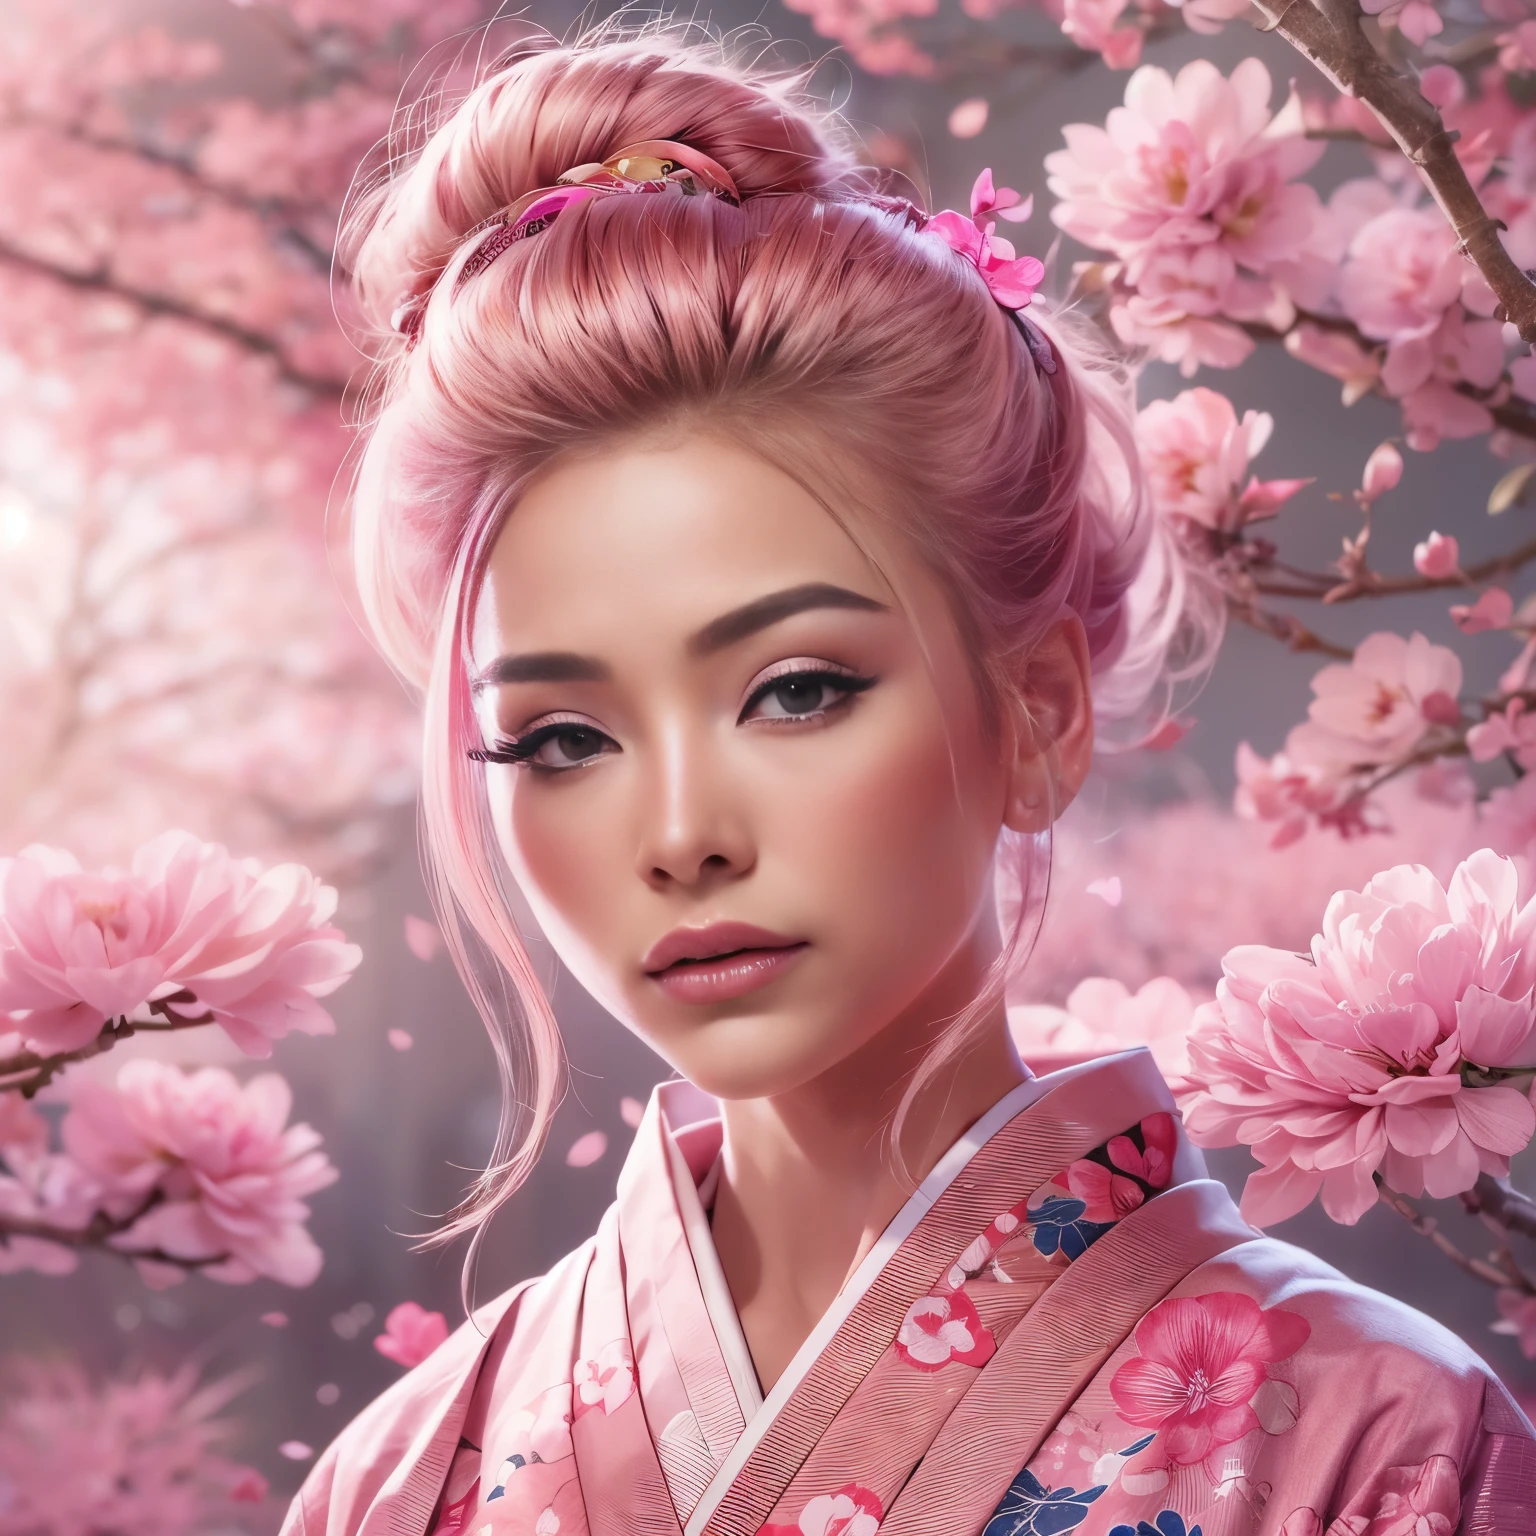 A hyper-realistic, highly detailed, and high-resolution 16k image of a young, beautiful female with engfa face. she has top bun pink hair and translucent skin, and  dressed in a traditional pink Japanese kimono with a small flower design. The image captures the ethereal beauty and mystique of the spirit world. The style  inspired by the delicate, soft aesthetic found in traditional Japanese art. The background was full of pink sakura tree with pink lighting.